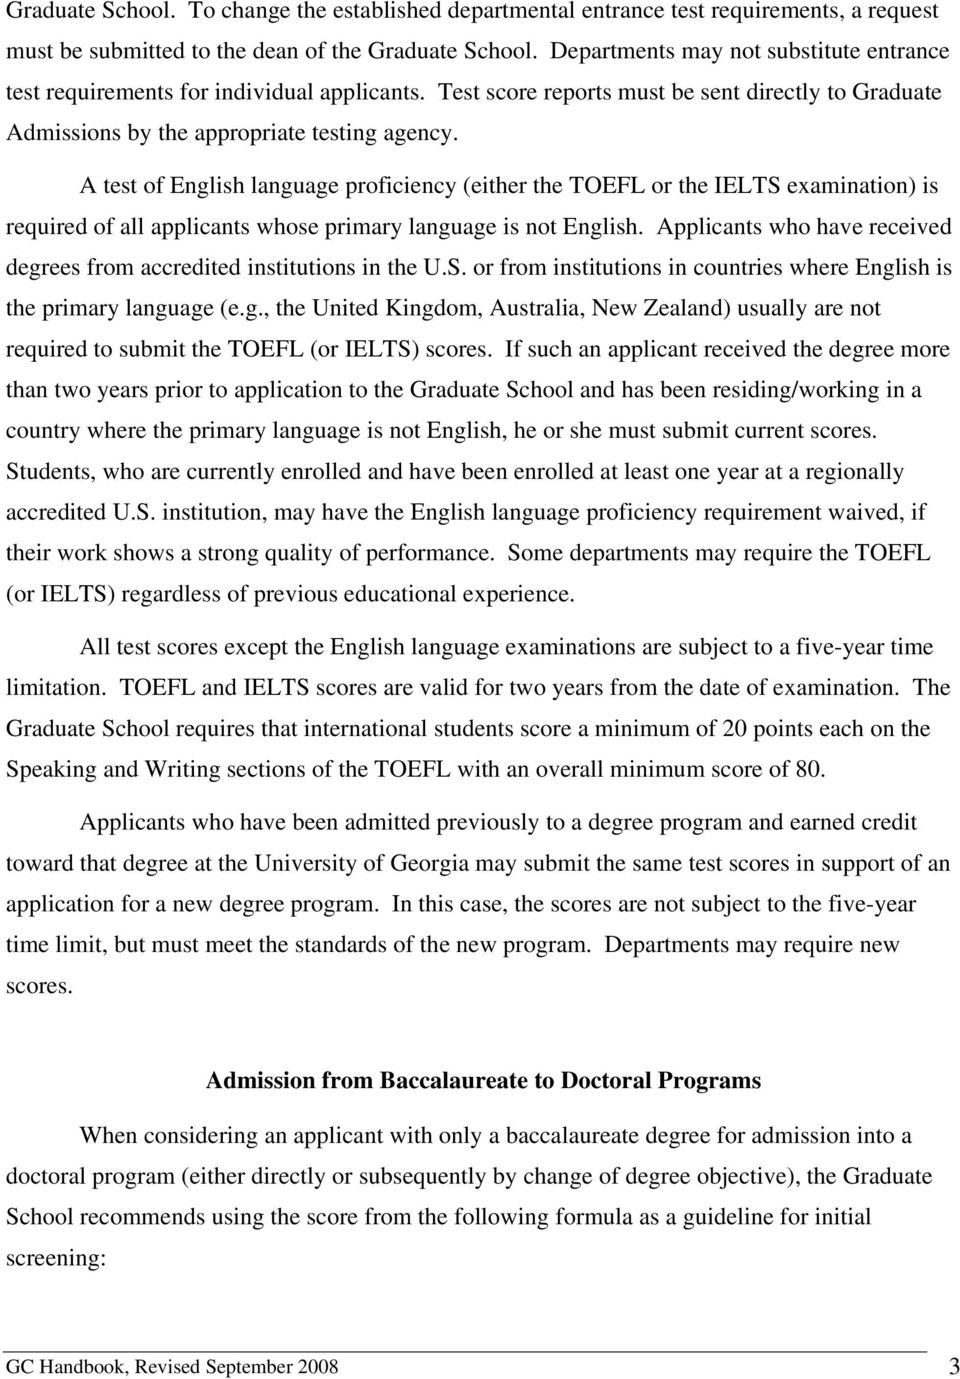 A test of English language proficiency (either the TOEFL or the IELTS examination) is required of all applicants whose primary language is not English.